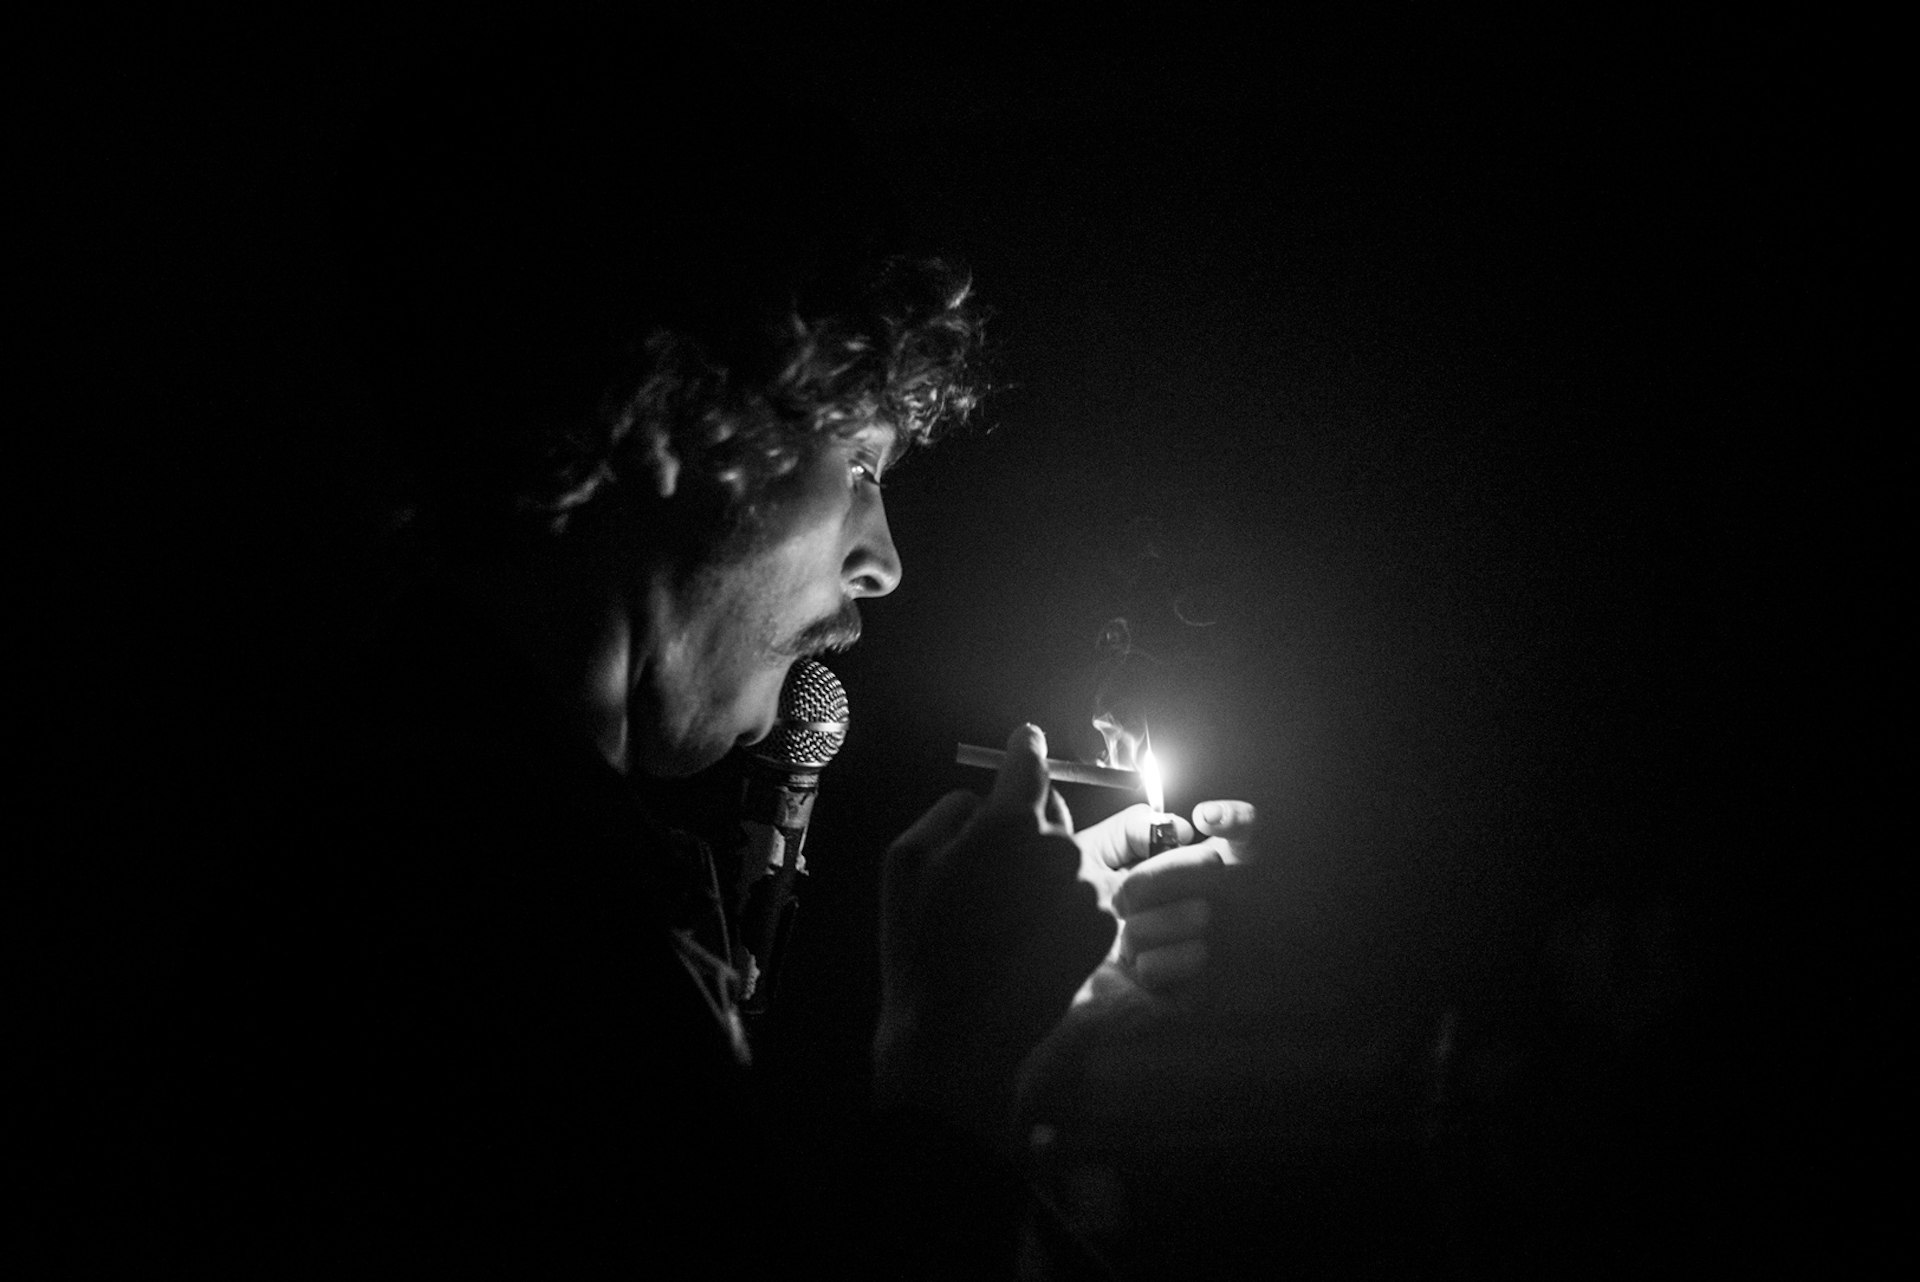 Saul Adamczewski lights a cigarette while performing with members of Paranoid London, Warmduscher and Fat White Family at the Good Room in Brooklyn on Septempber 30, 2015. The largely improvised set was only announced the day before.